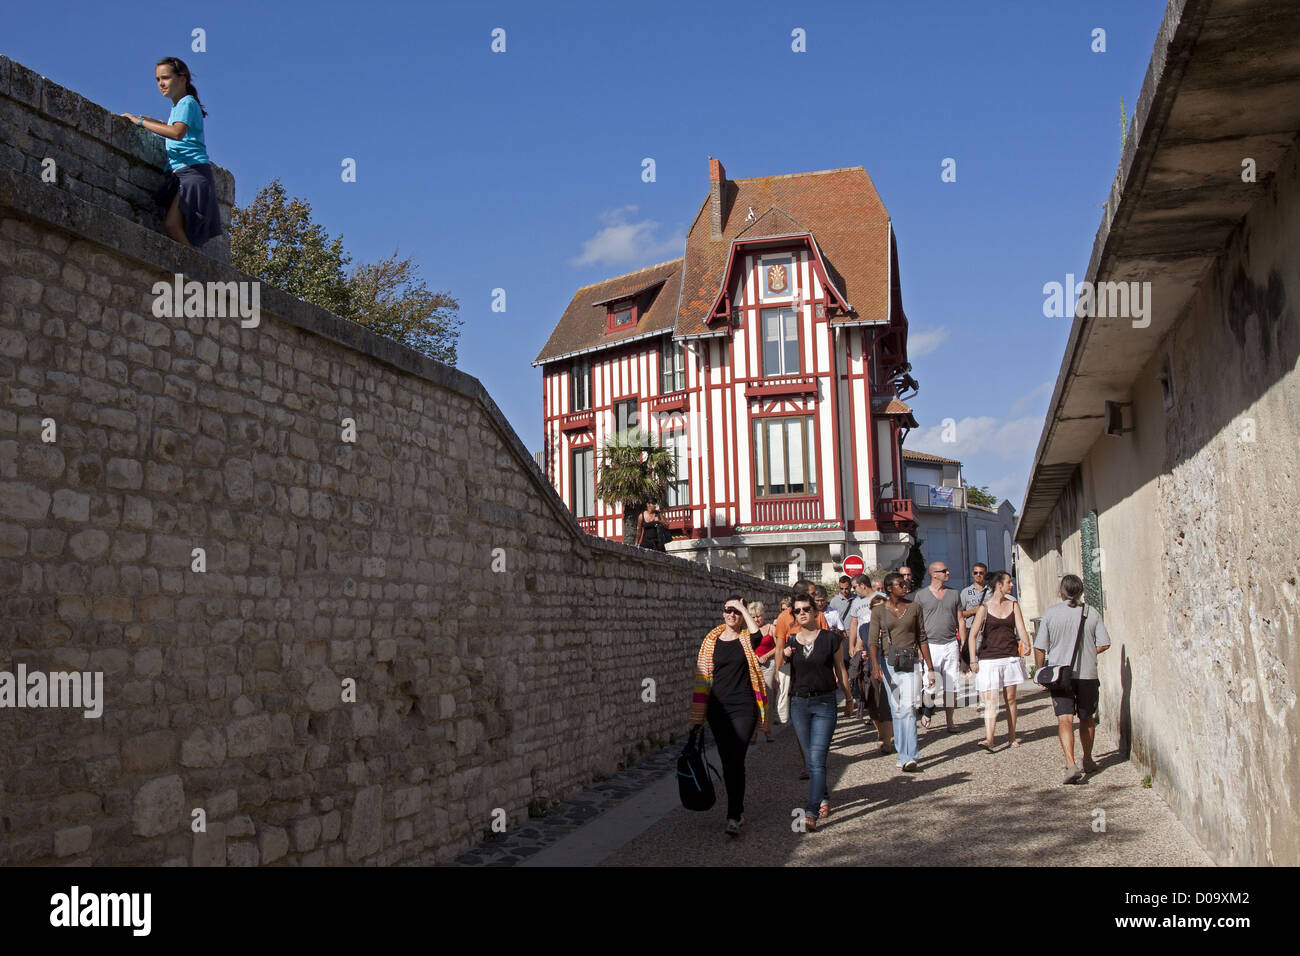 TOURISTS WALKING IN STREETS ON WALLS IN TOWN CENTRE LA ROCHELLE CHARENTE-MARITIME POITOU-CHARENTE REGION FRANCE Stock Photo